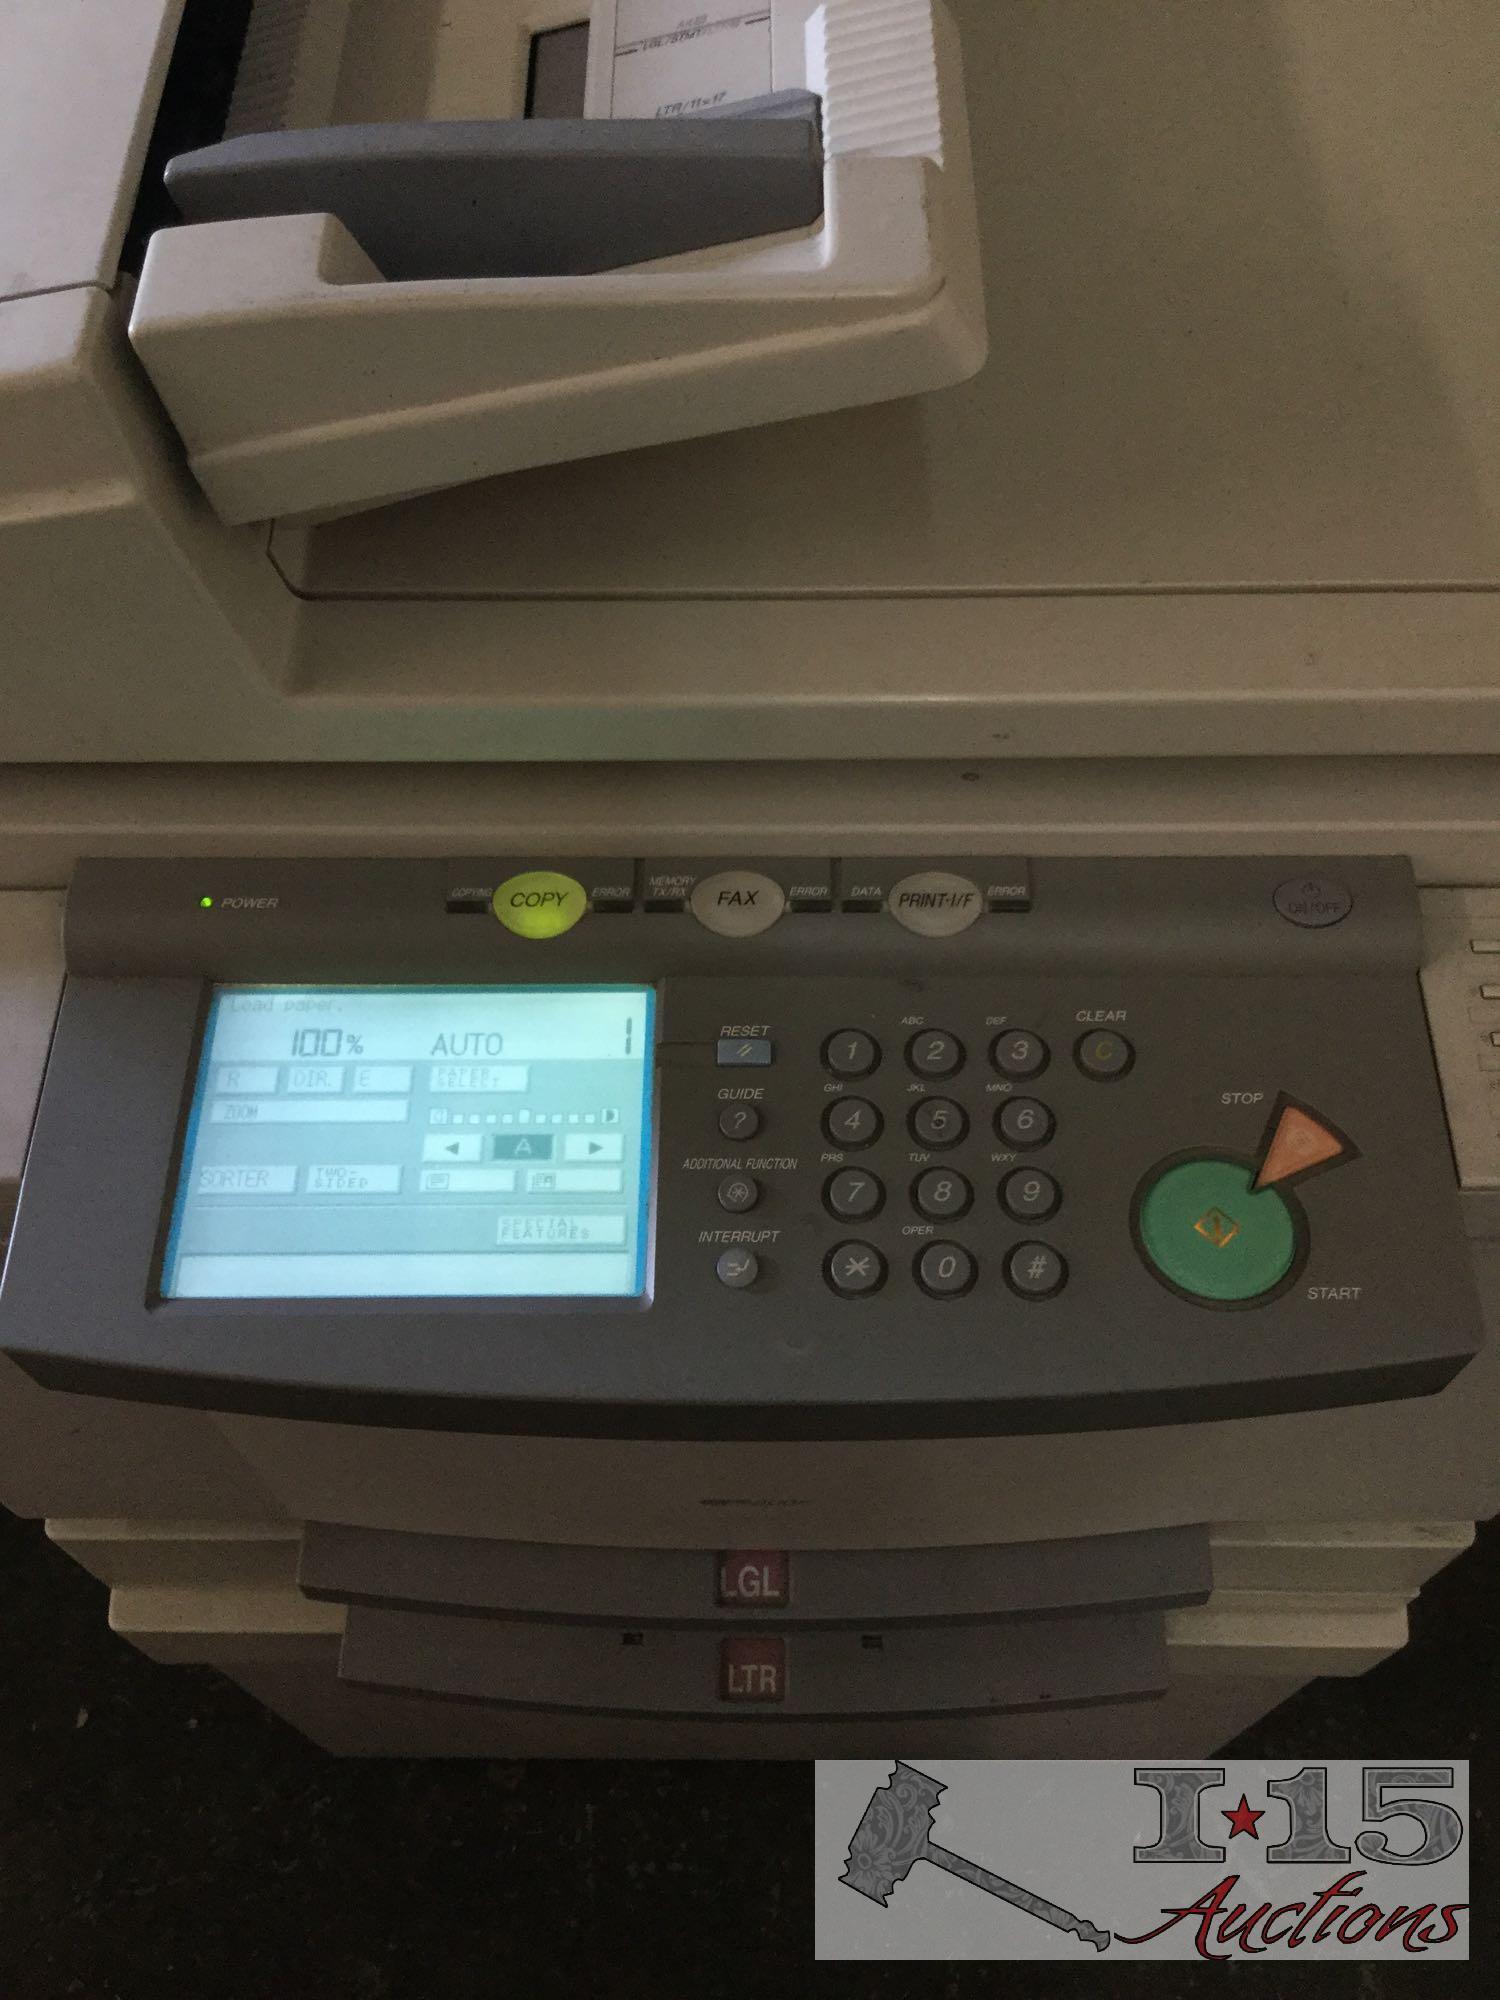 Large working Canon print, copy and fax machine